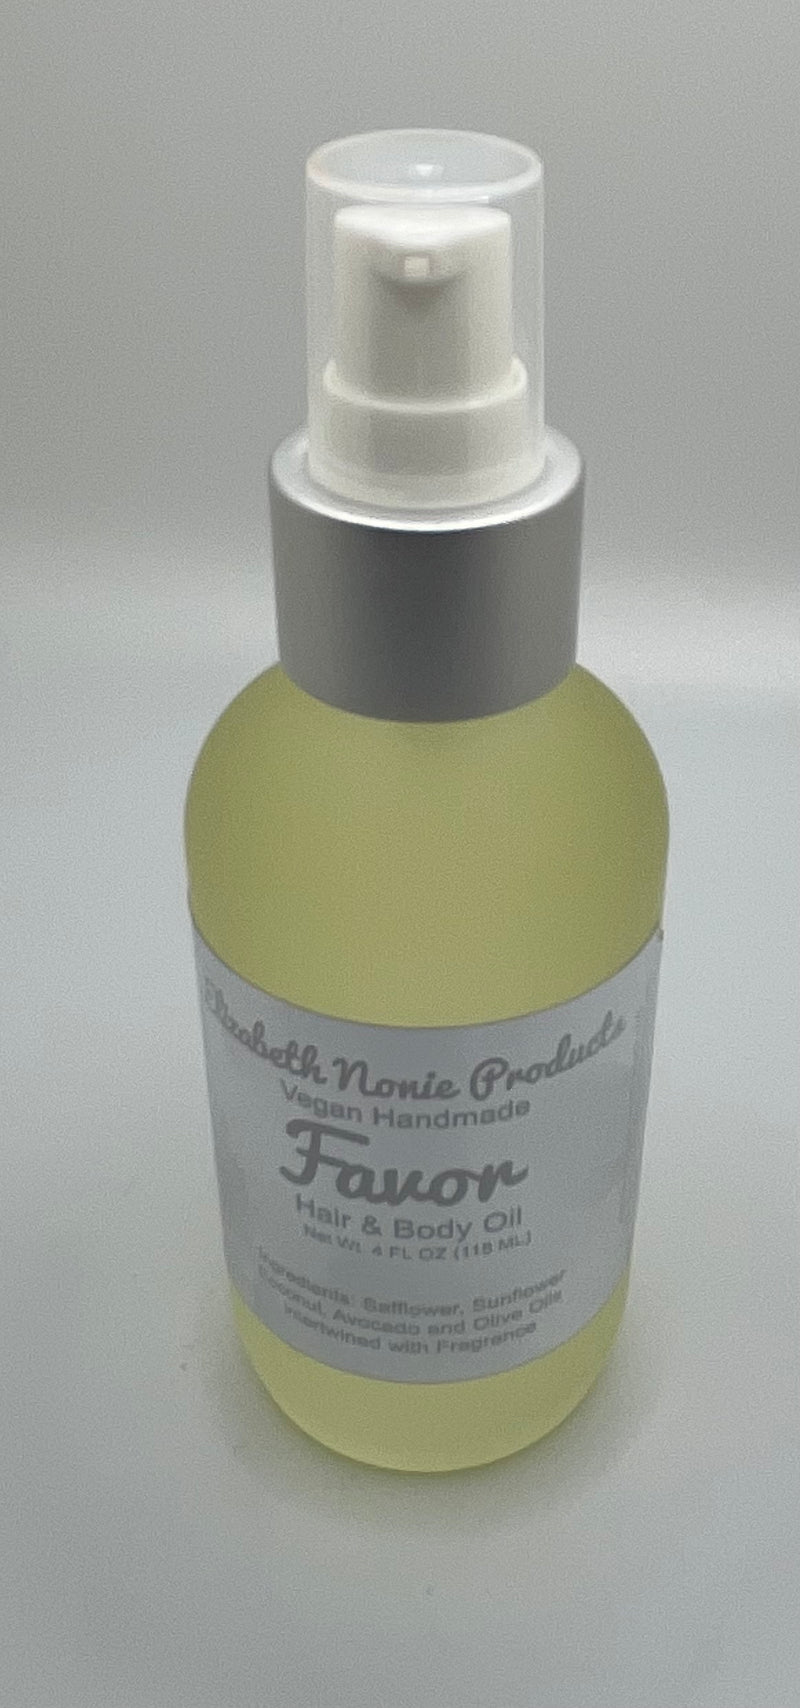 Favor Hair and Body Oil